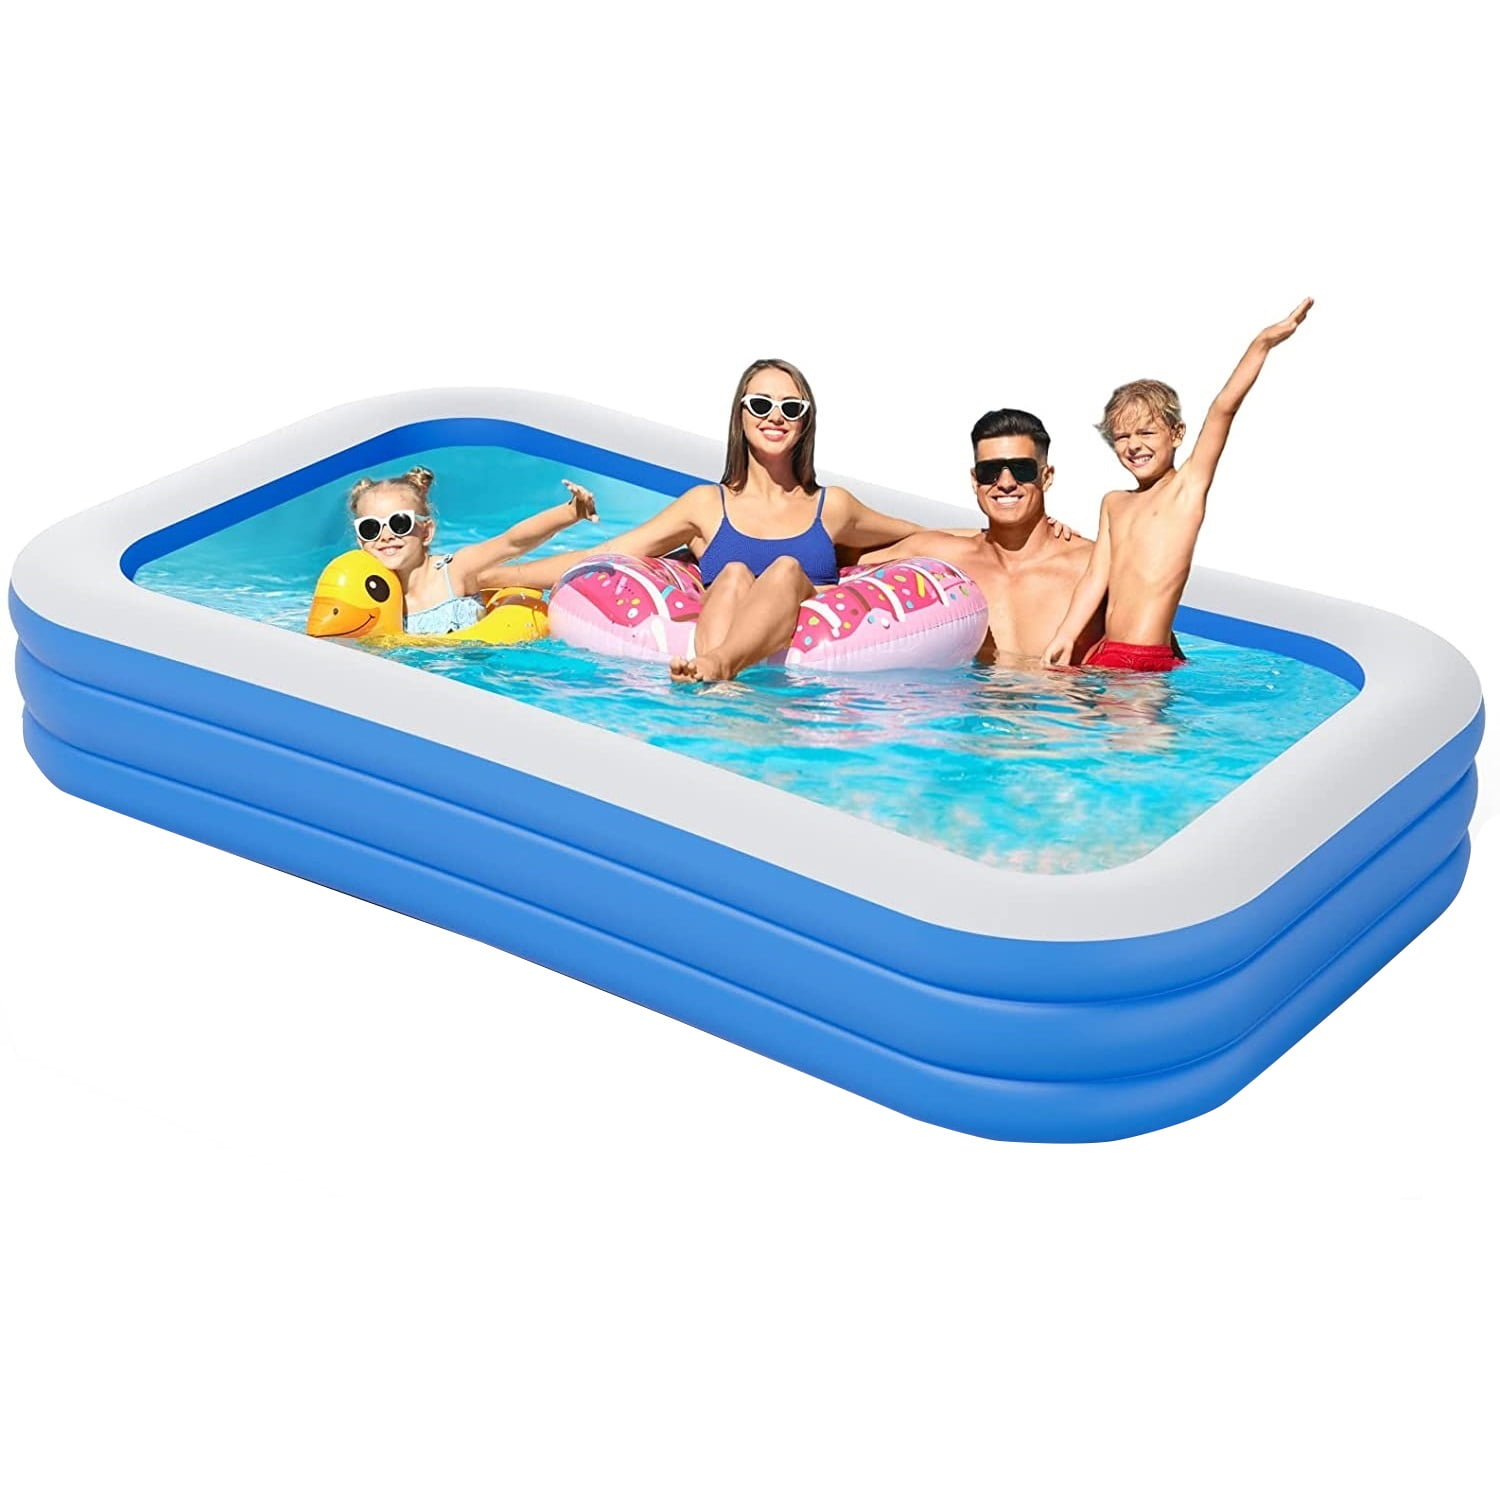 Toddler Pool Kiddie Pool Inflatable Pool for Kids and Adults Family Rectangle Pool Above Ground Swimming Pool 6ft-3Rings Premium Plastic Pool for Kids Pools for Backyard,Outdoor,Party 